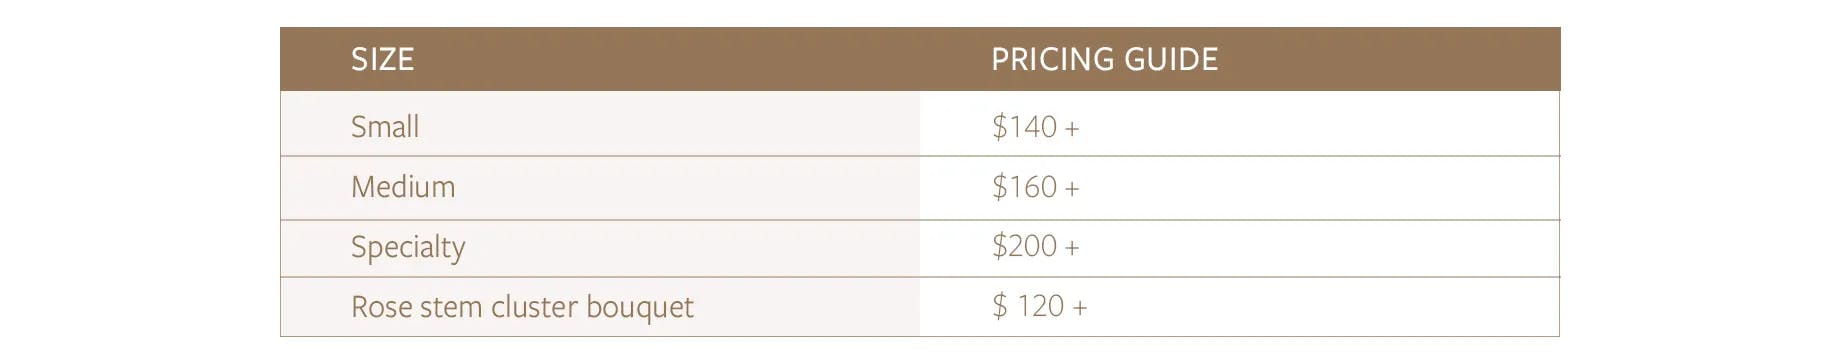 A pricing guide displayed in a table format with two columns: "Size" and "Pricing Guide." The prices are as follows: Small - $140+, Medium - $160+, Specialty - $200+, Rose stem cluster bouquet - $120+. The table has a brown header background.